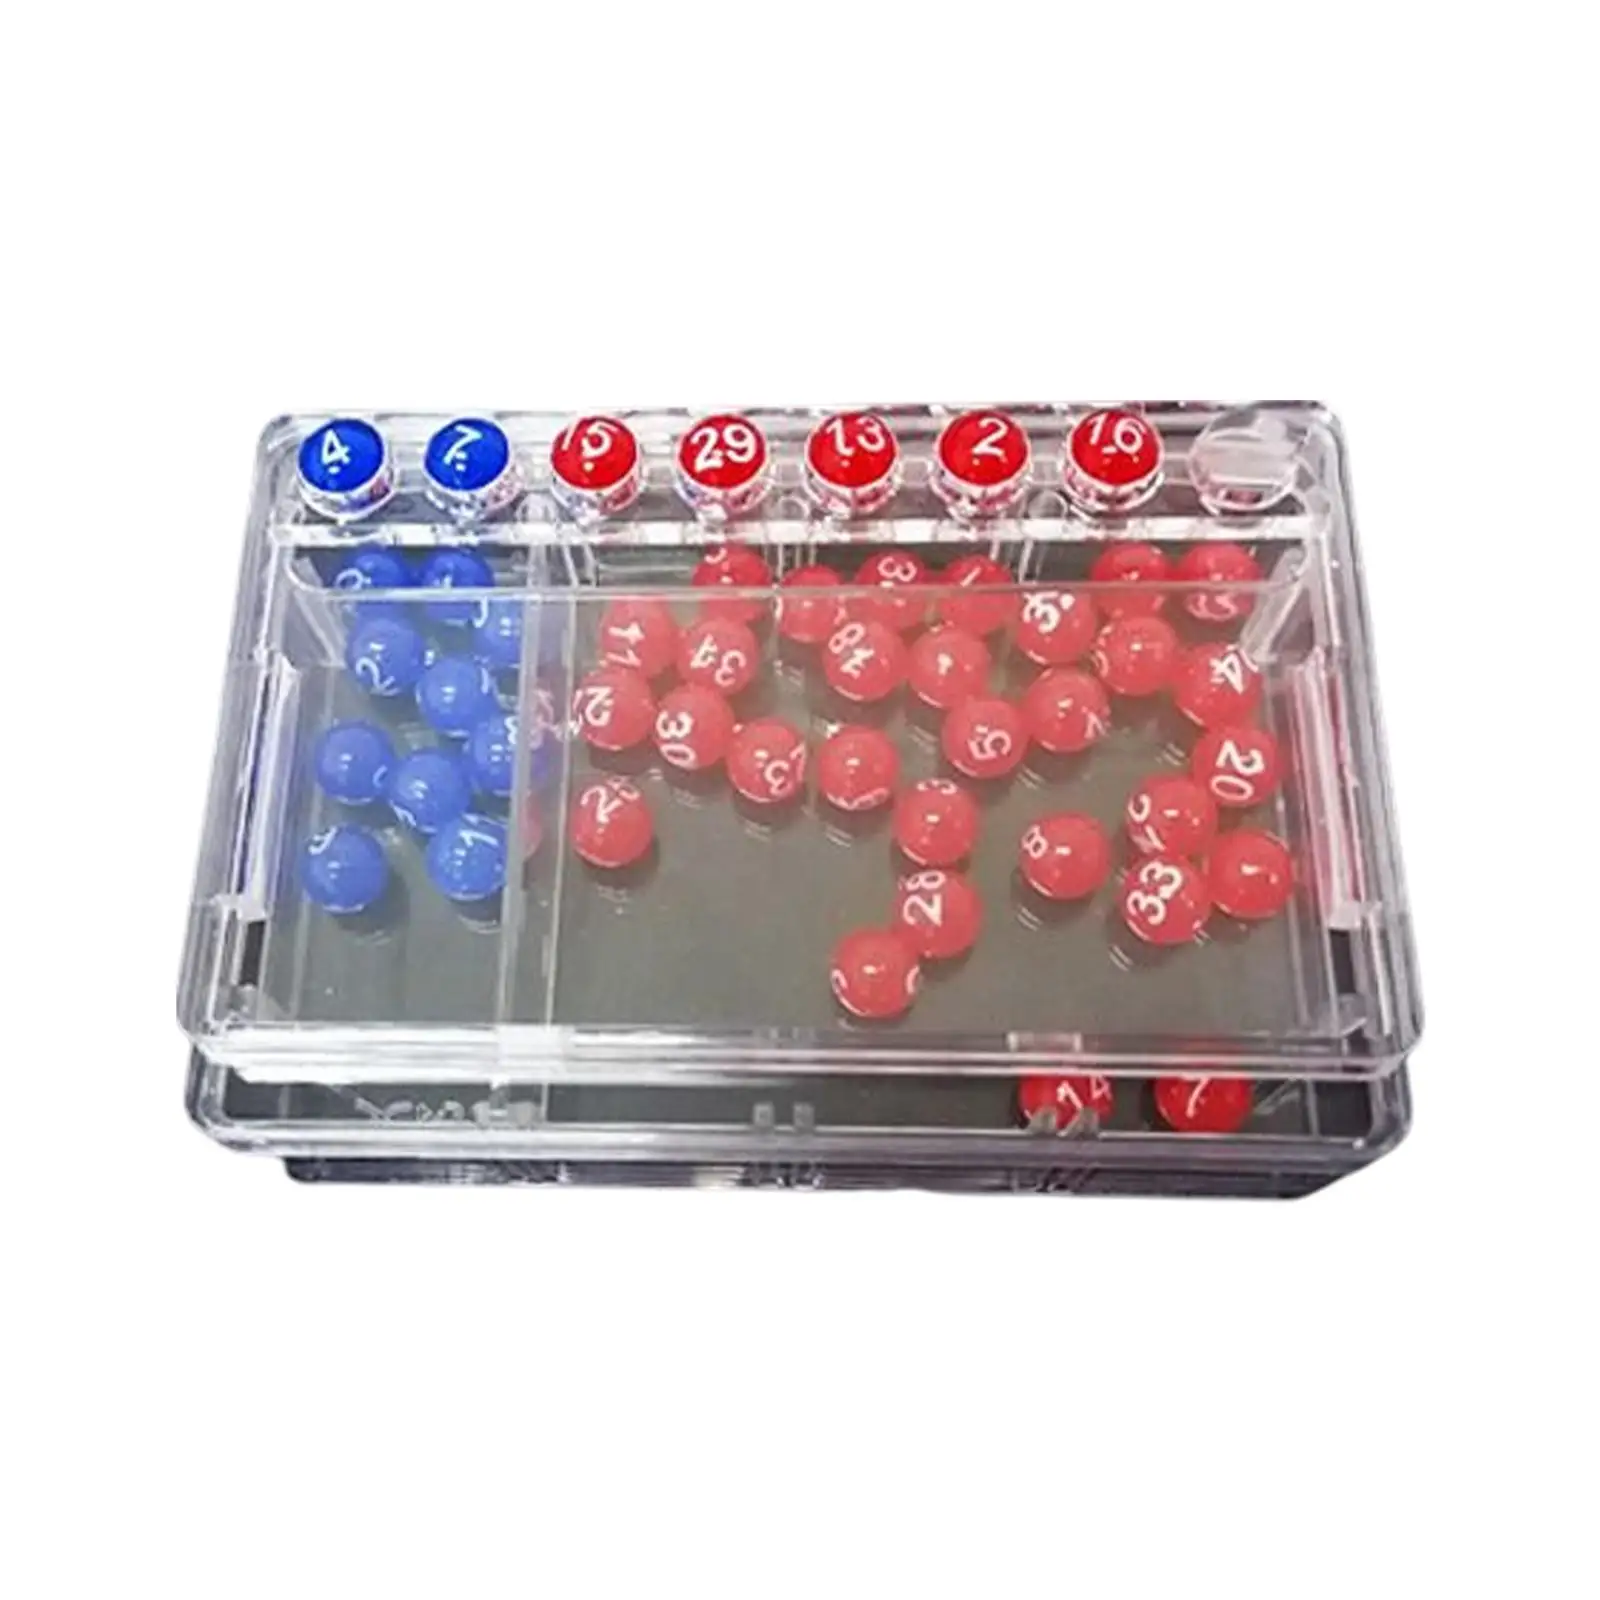 8mm Small Number Balls Lucky Number Picker Lottery Toy Gambling Balls